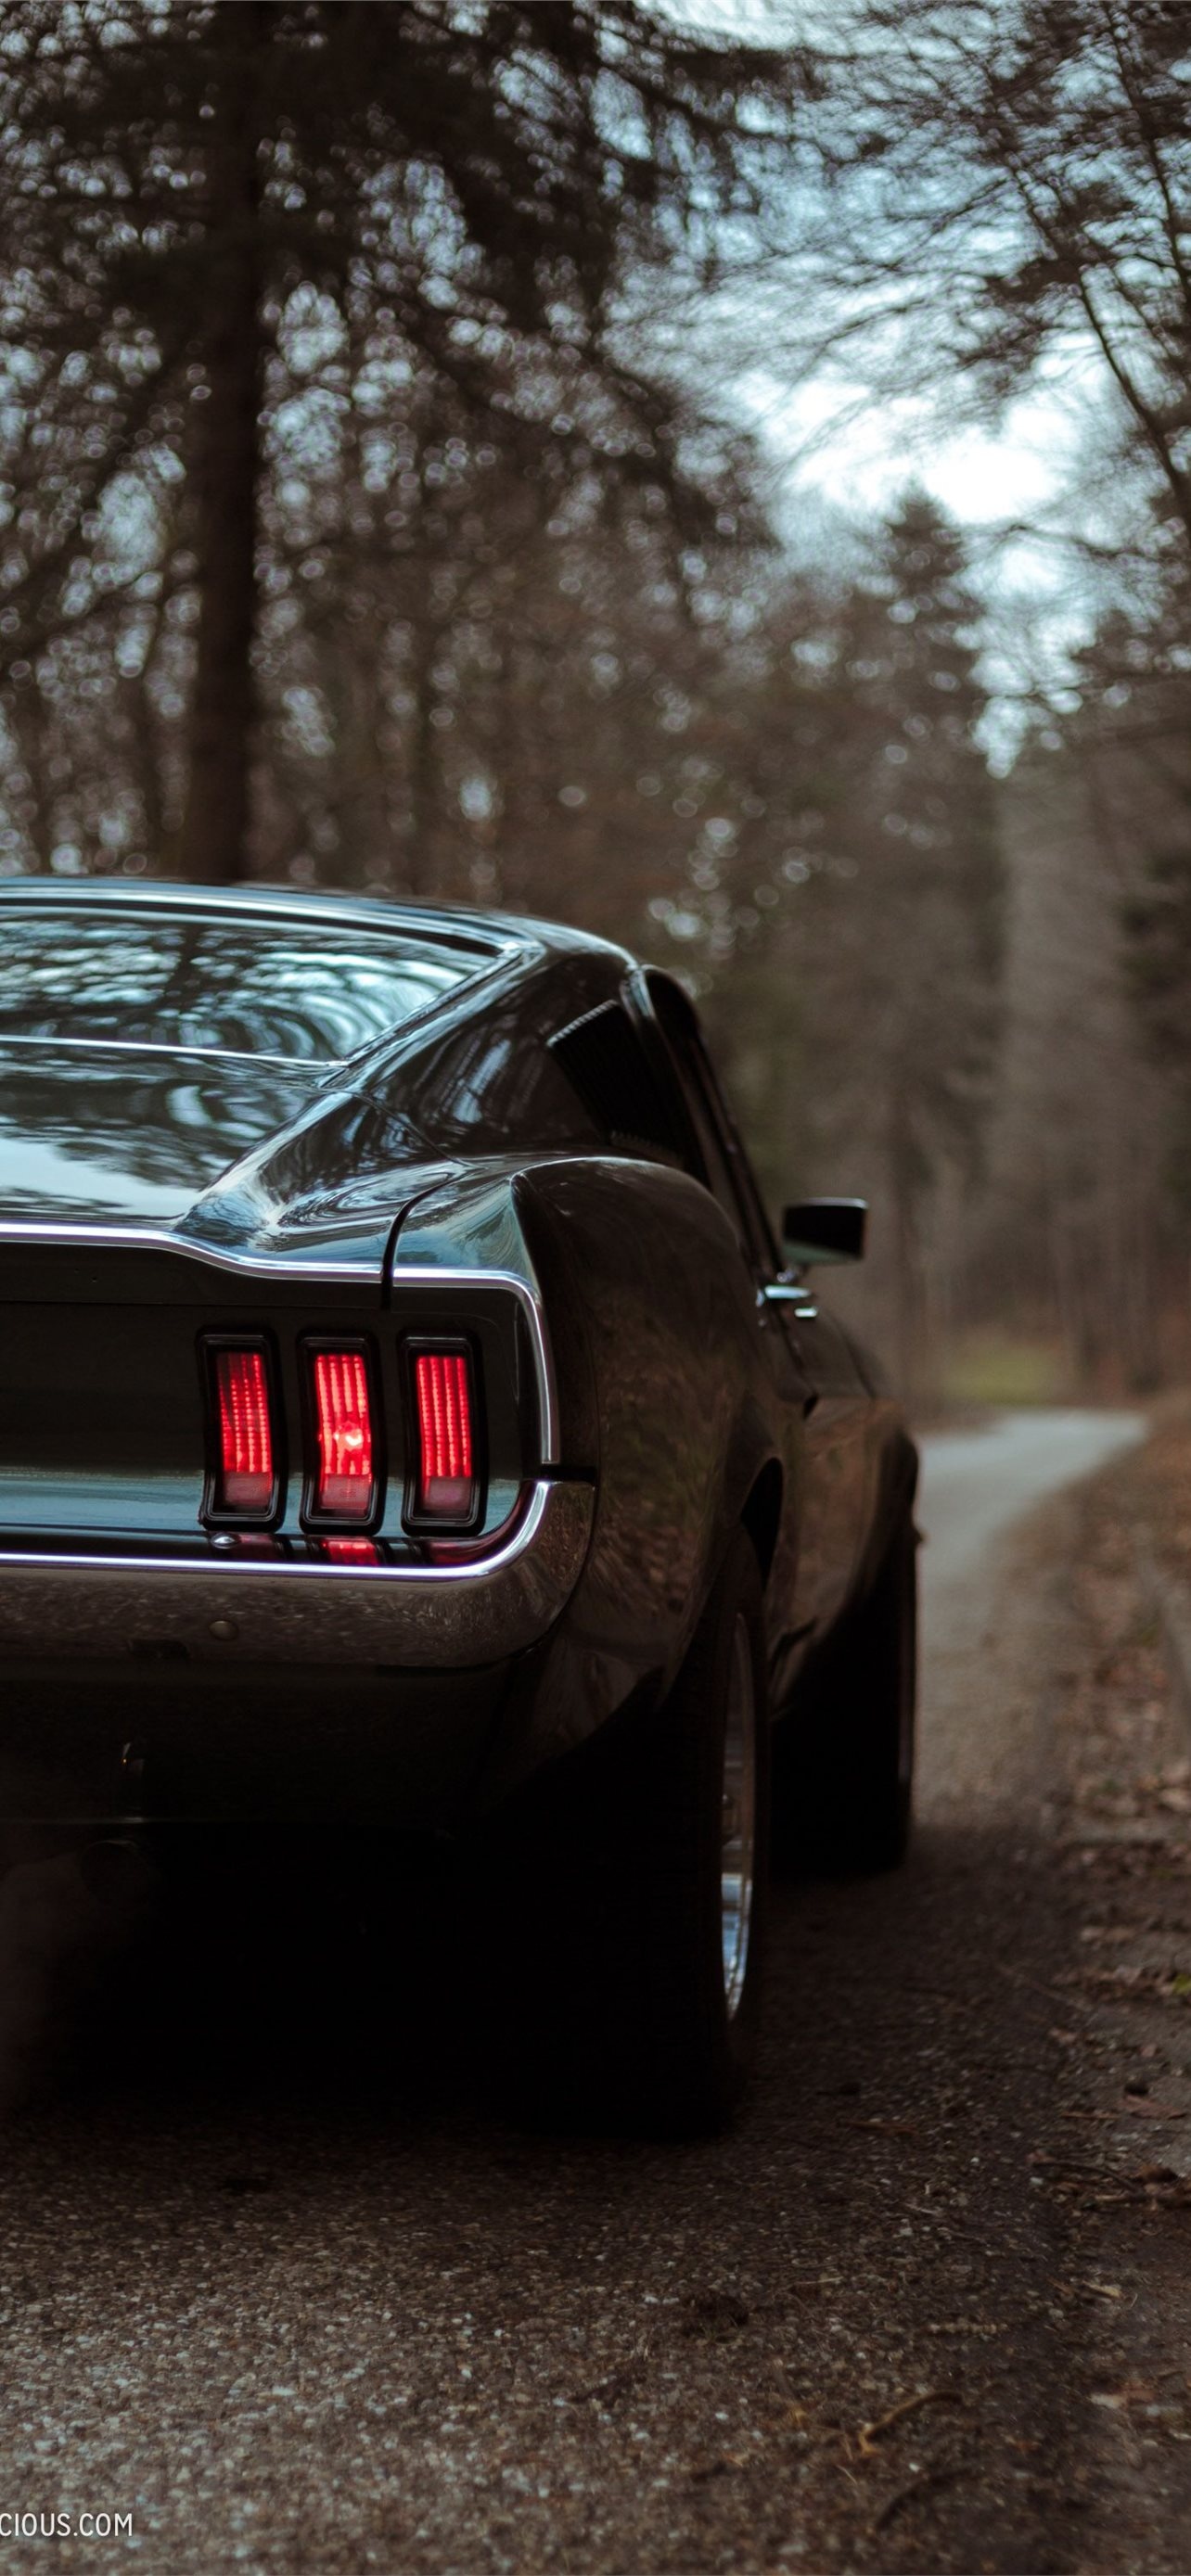 Ford Mustang Boss 429, Rare classic profile, Power under the hood, Muscular stance, Vintage beauty, 1290x2780 HD Handy